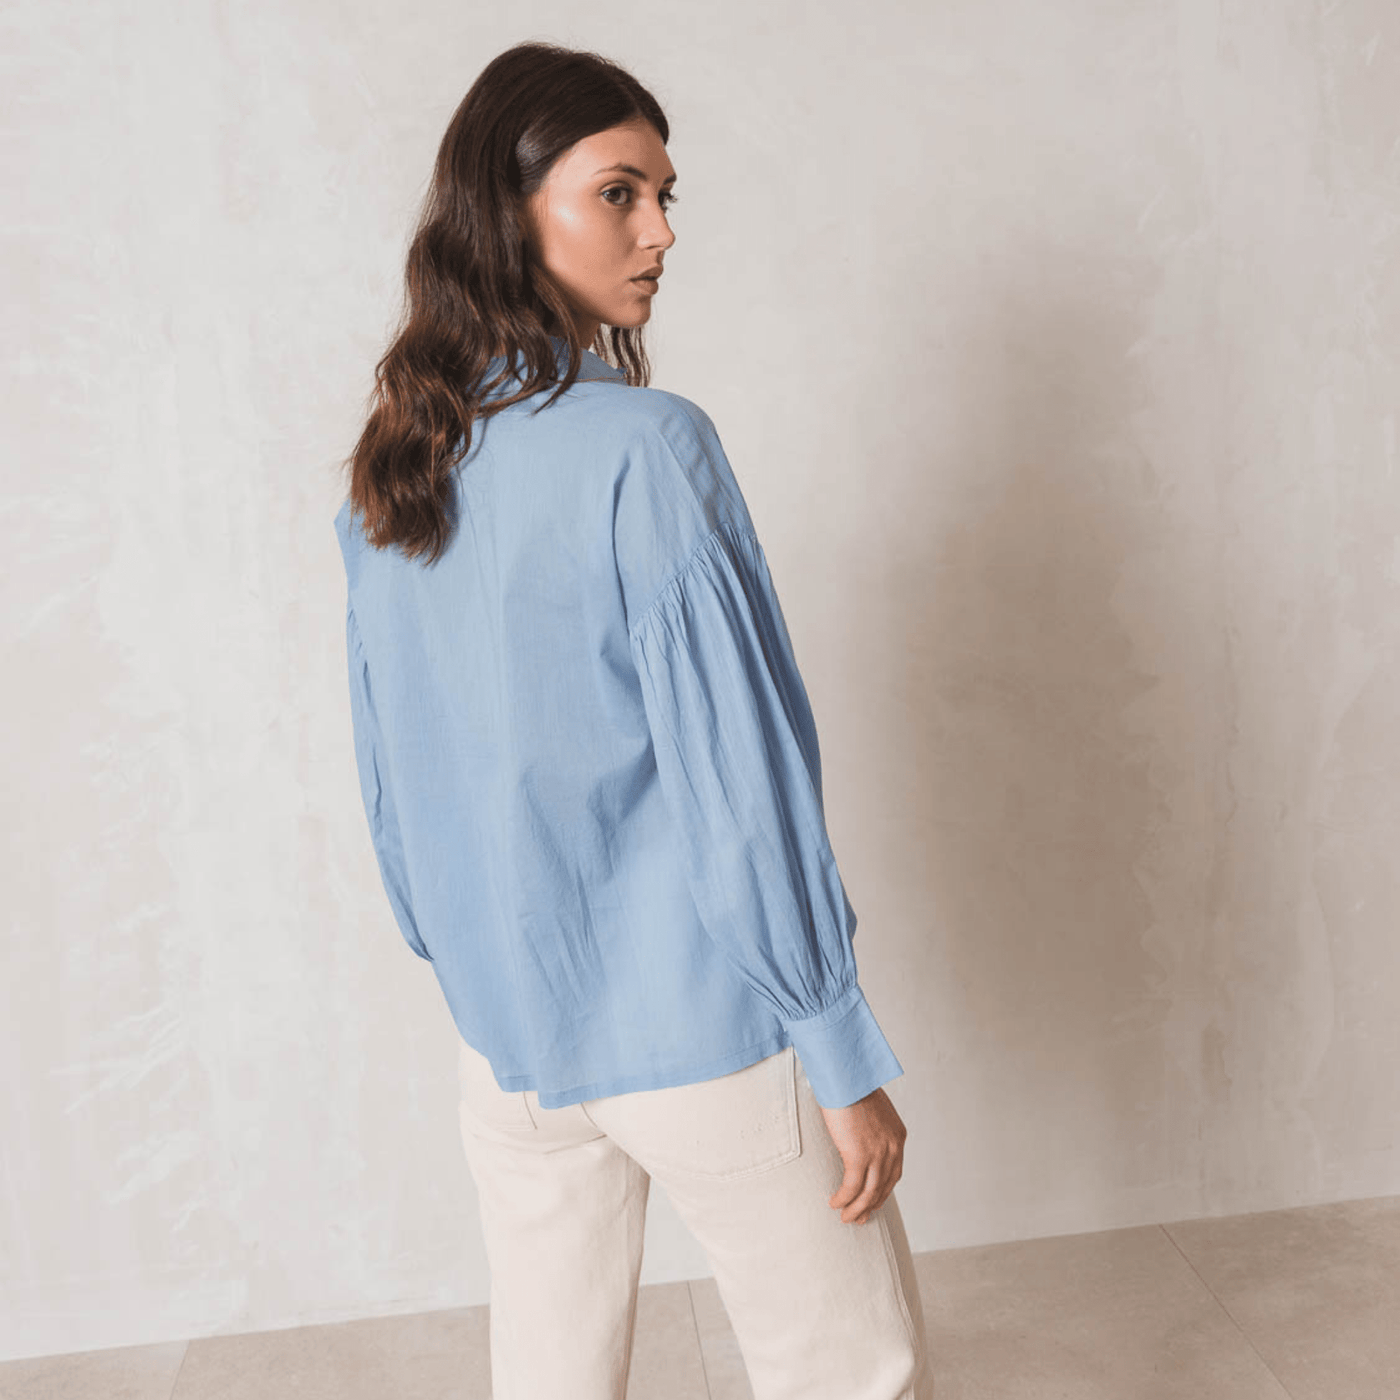 Indi and Cold Schiffli Embroidered Blouse